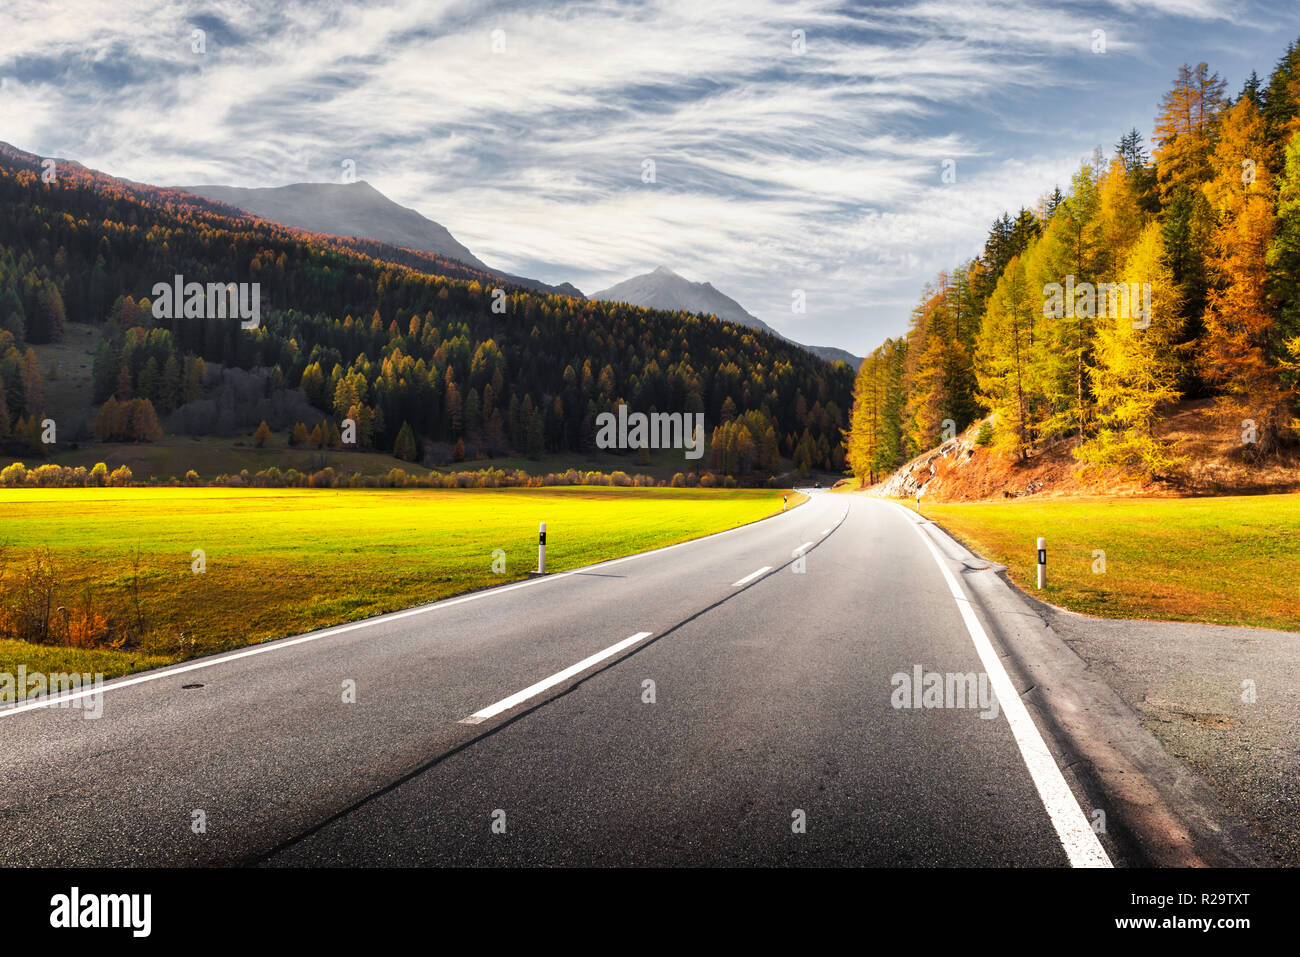 Amazing view of alpine road, orange larch forest and high mountains on background. Switzerland, near Italy border. Landscape photography Stock Photo